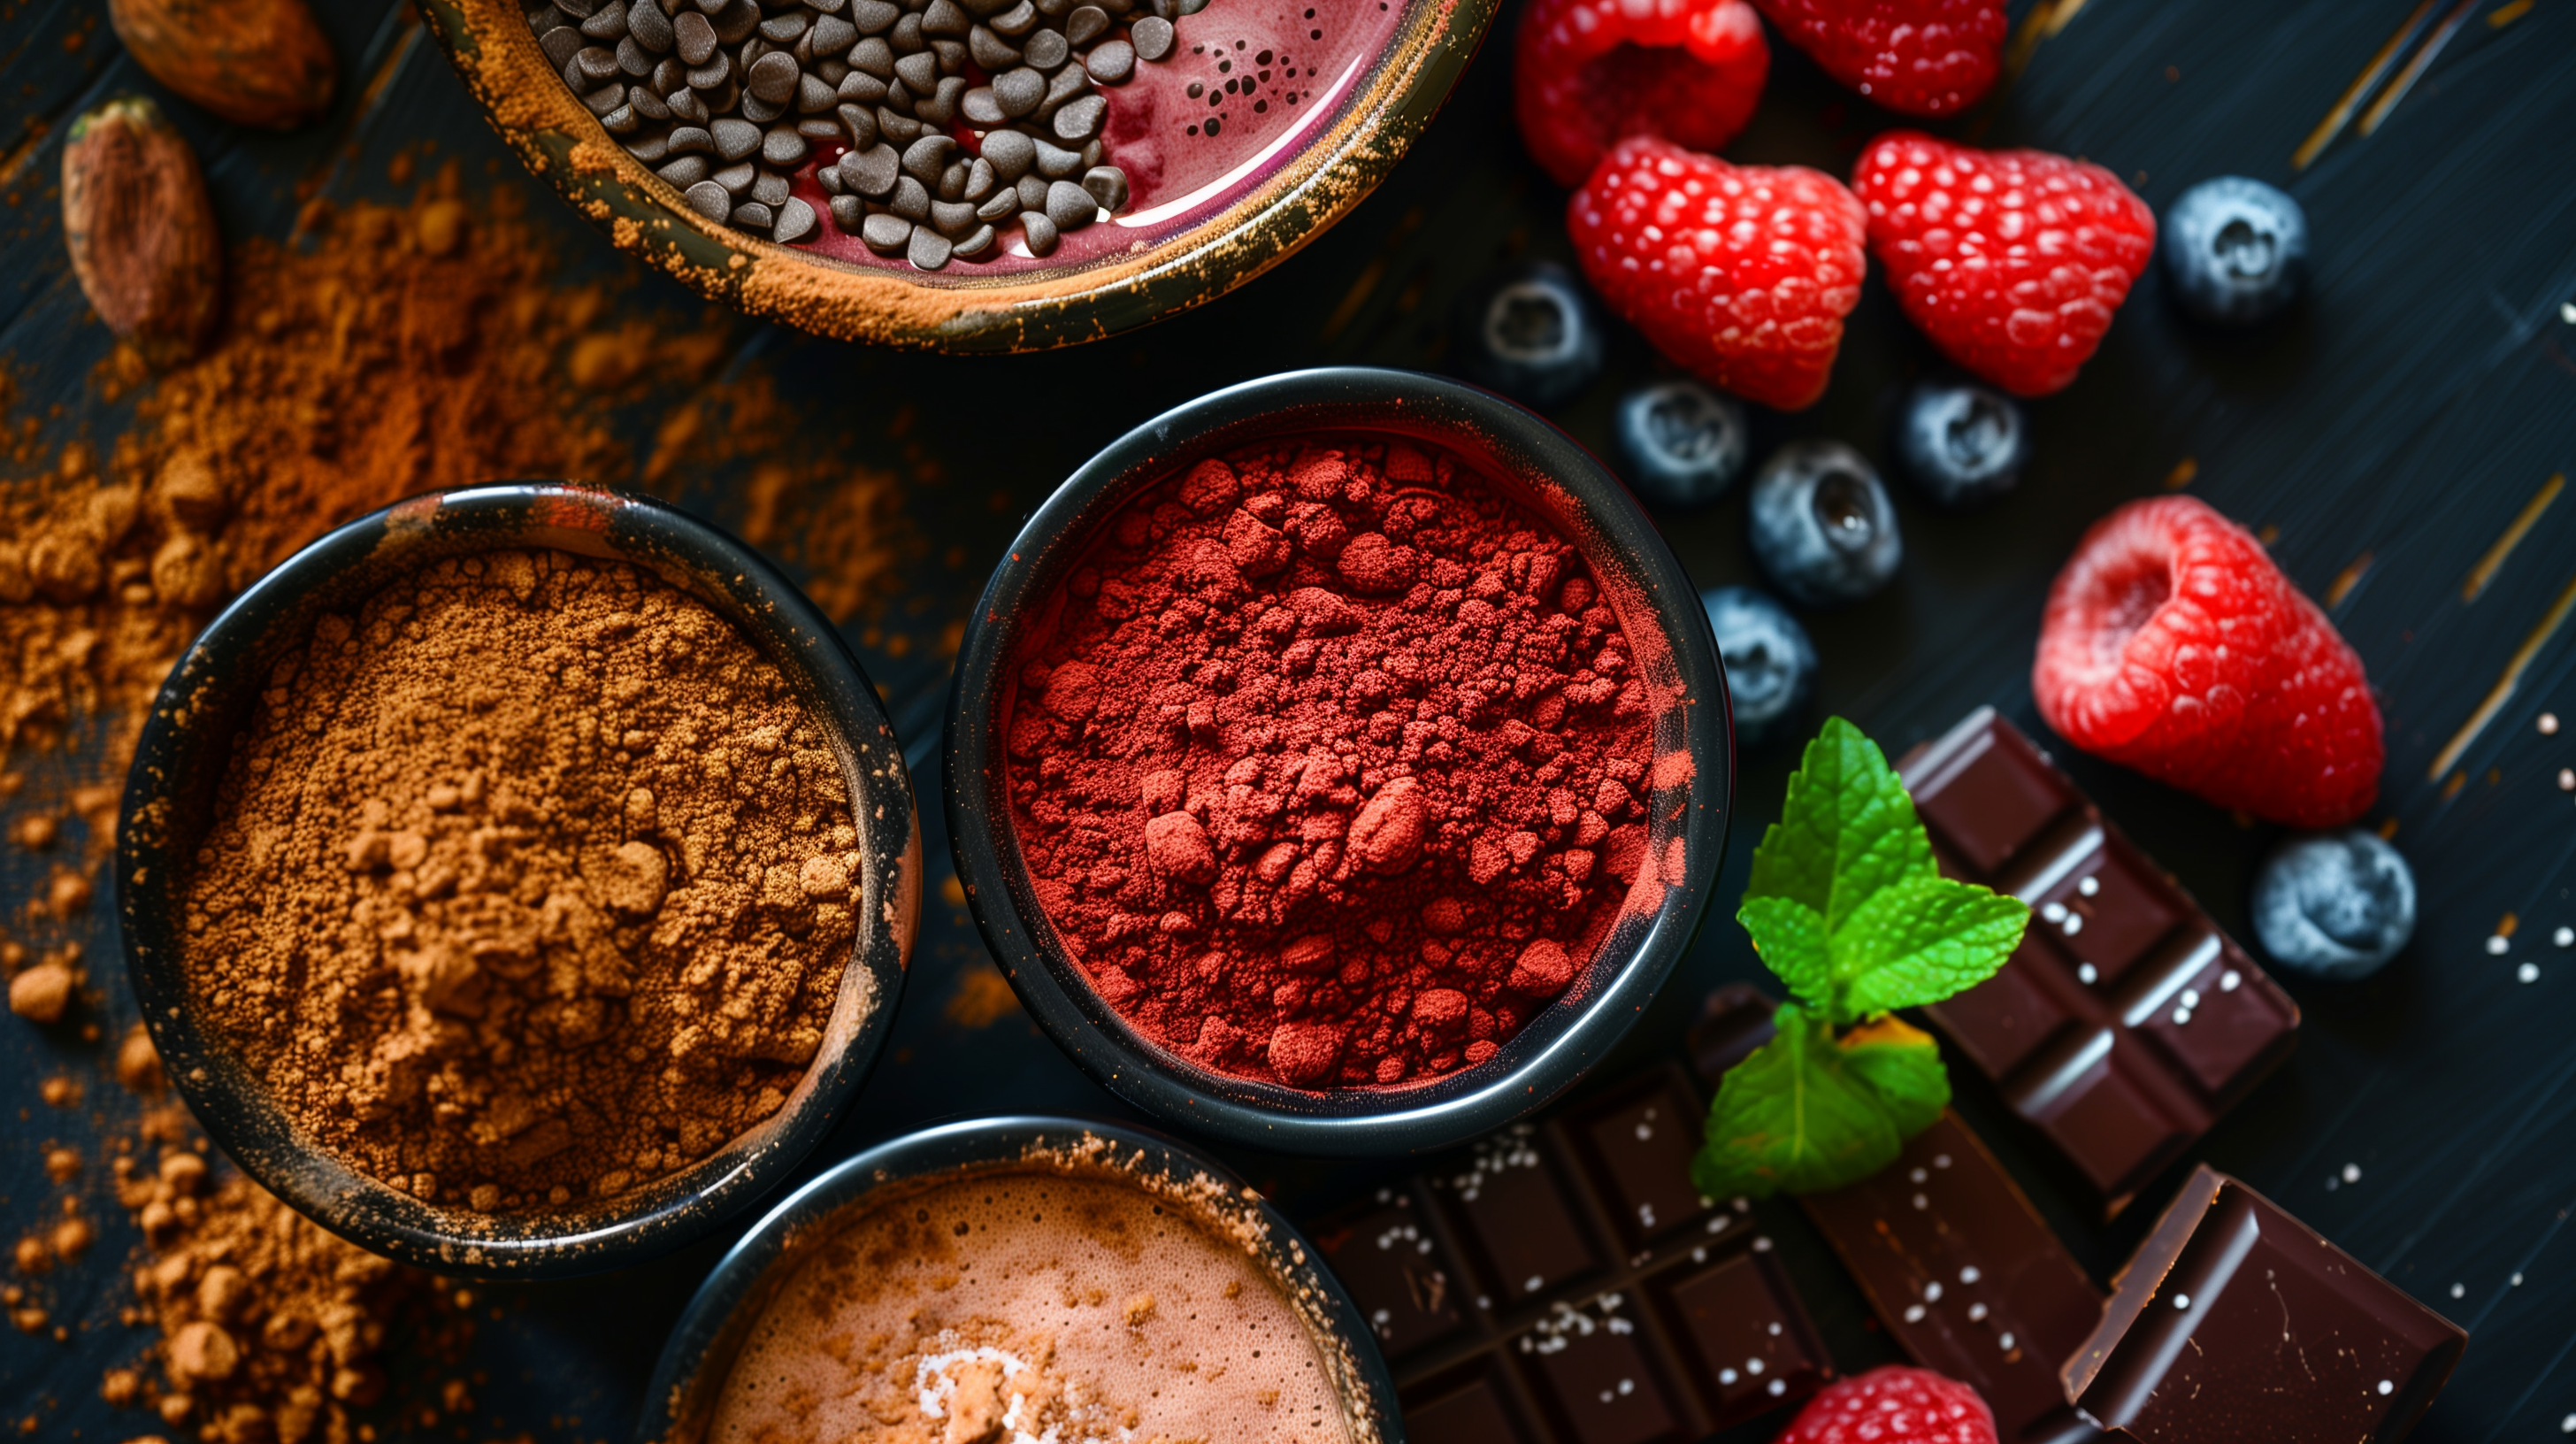 vibrant red powder, cacao powder and a red smoothie on a counter